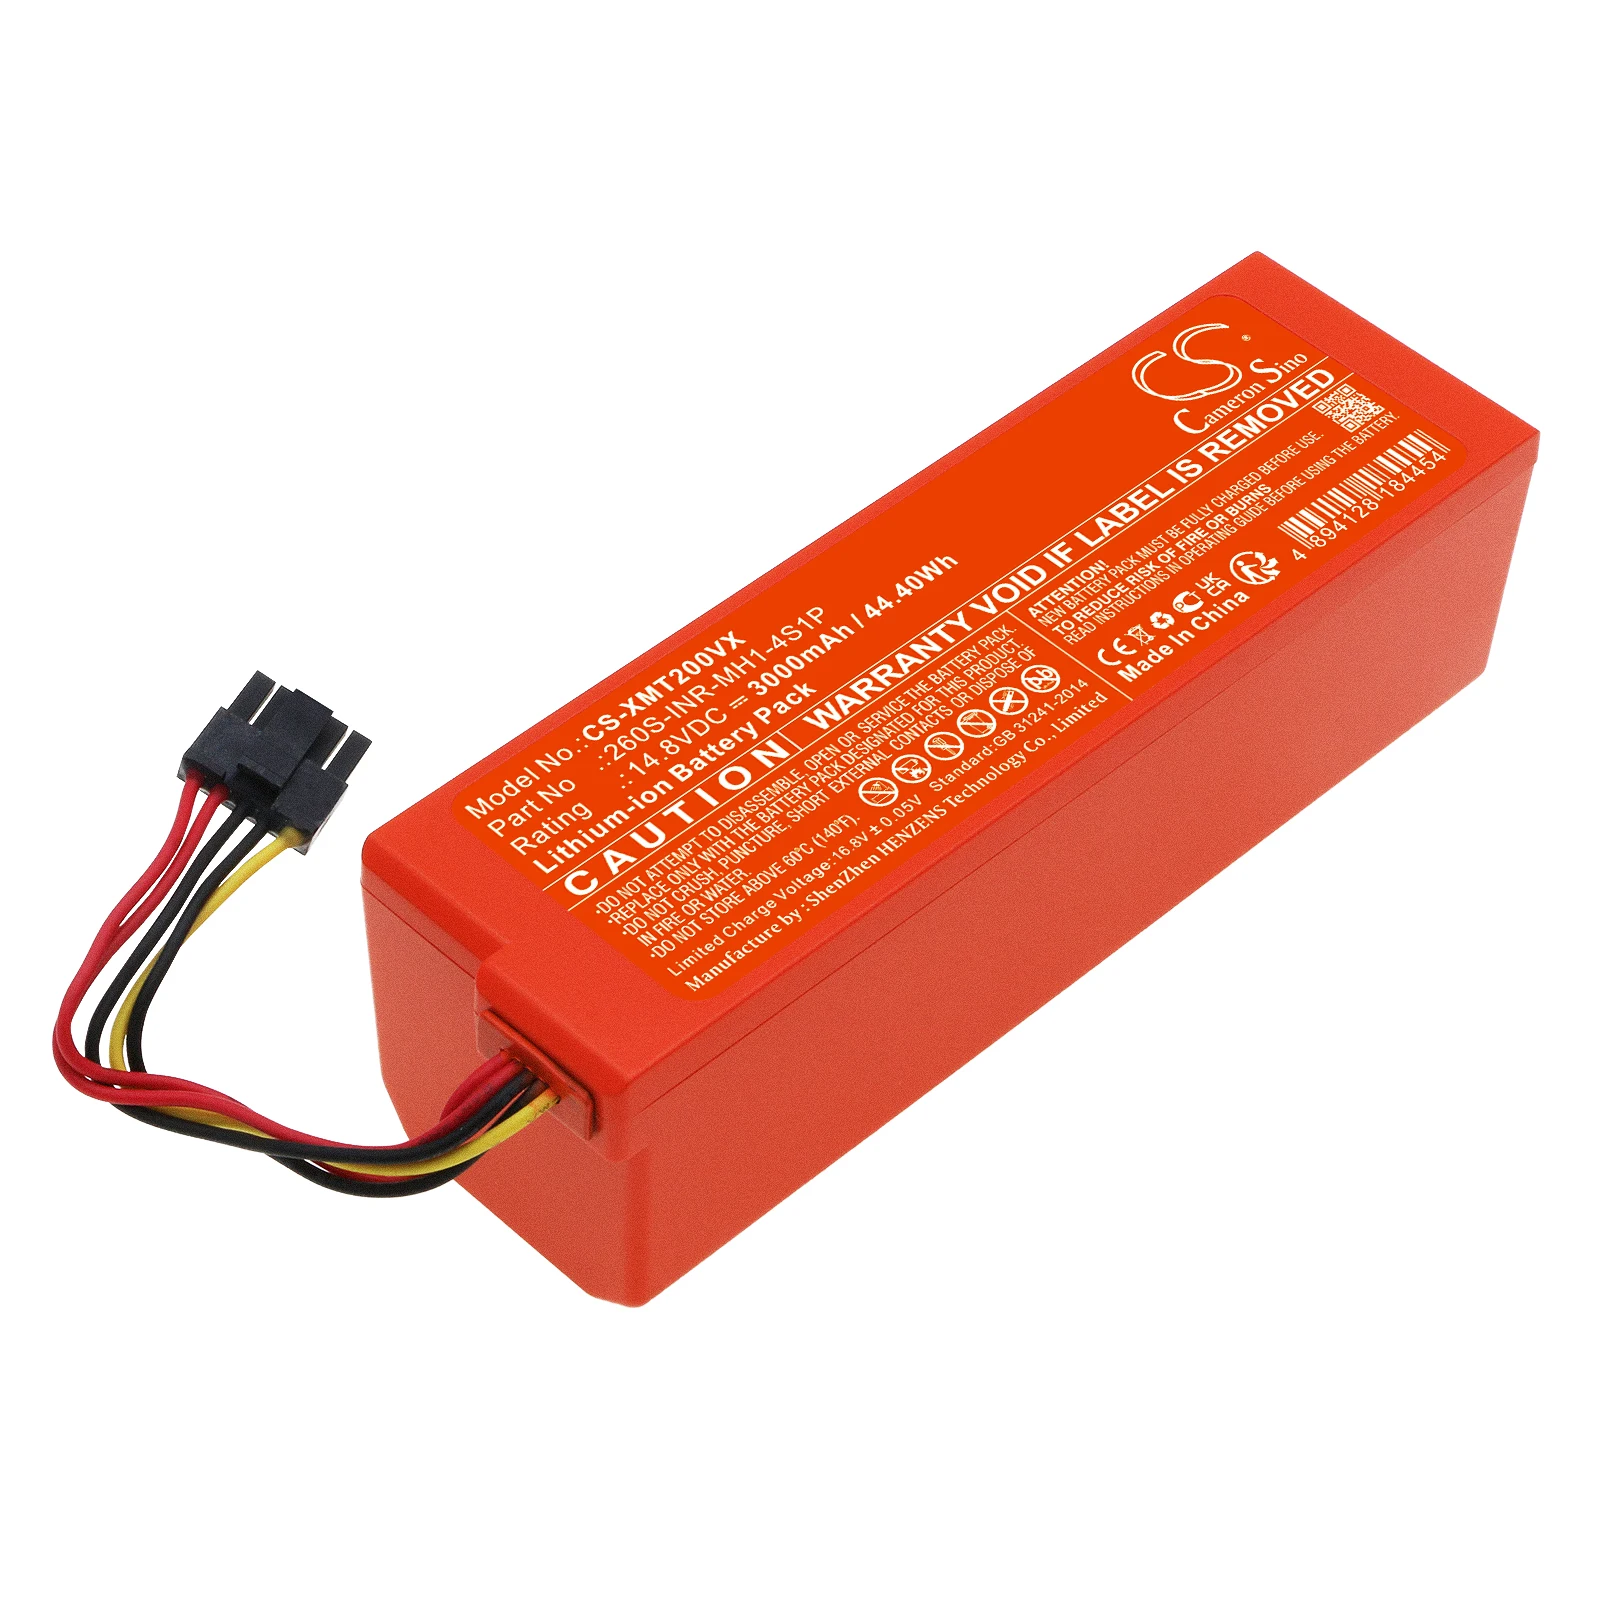 

Vacuum Battery For Xiaomi 260S-INR-MH1-4S1P MJST1S MJST1SHW 2 Pro Mop 2 LDS 2nd Capacity 3000mAh / 44.40Wh Color Red Volts 14.8V